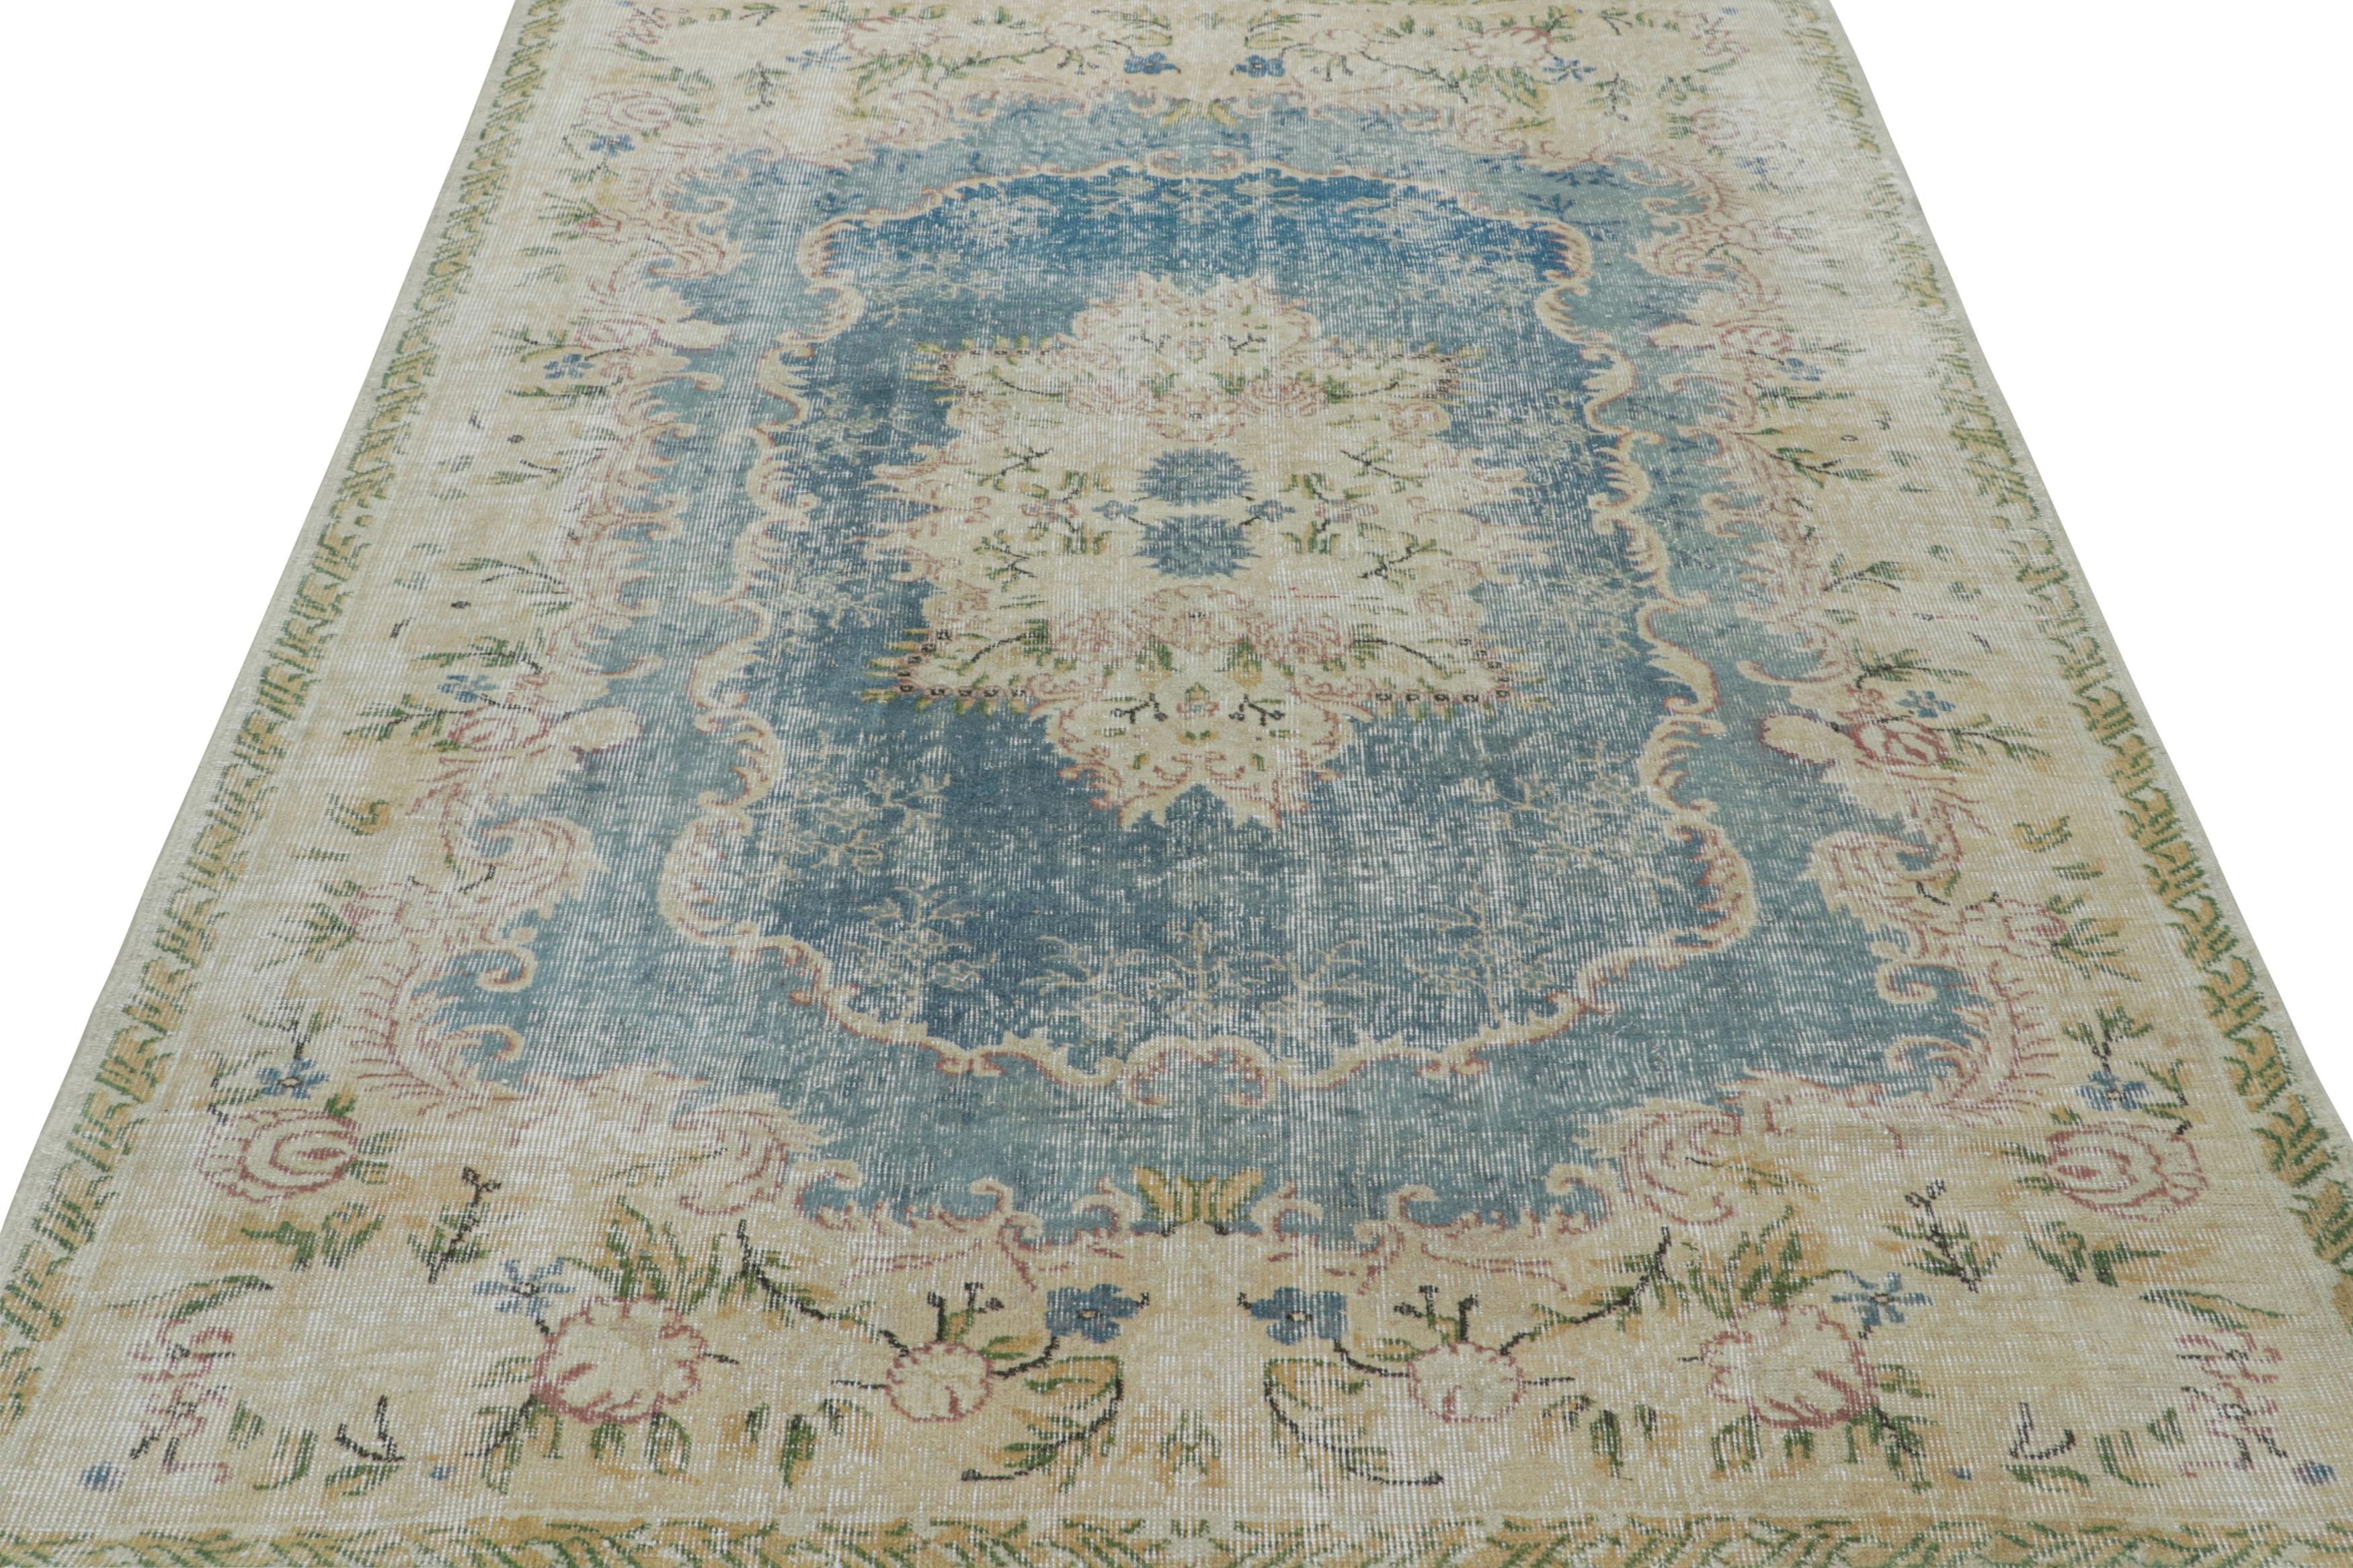 Turkish Rug & Kilim’s Aubusson Style Rug in Beige, with Floral patterns. For Sale